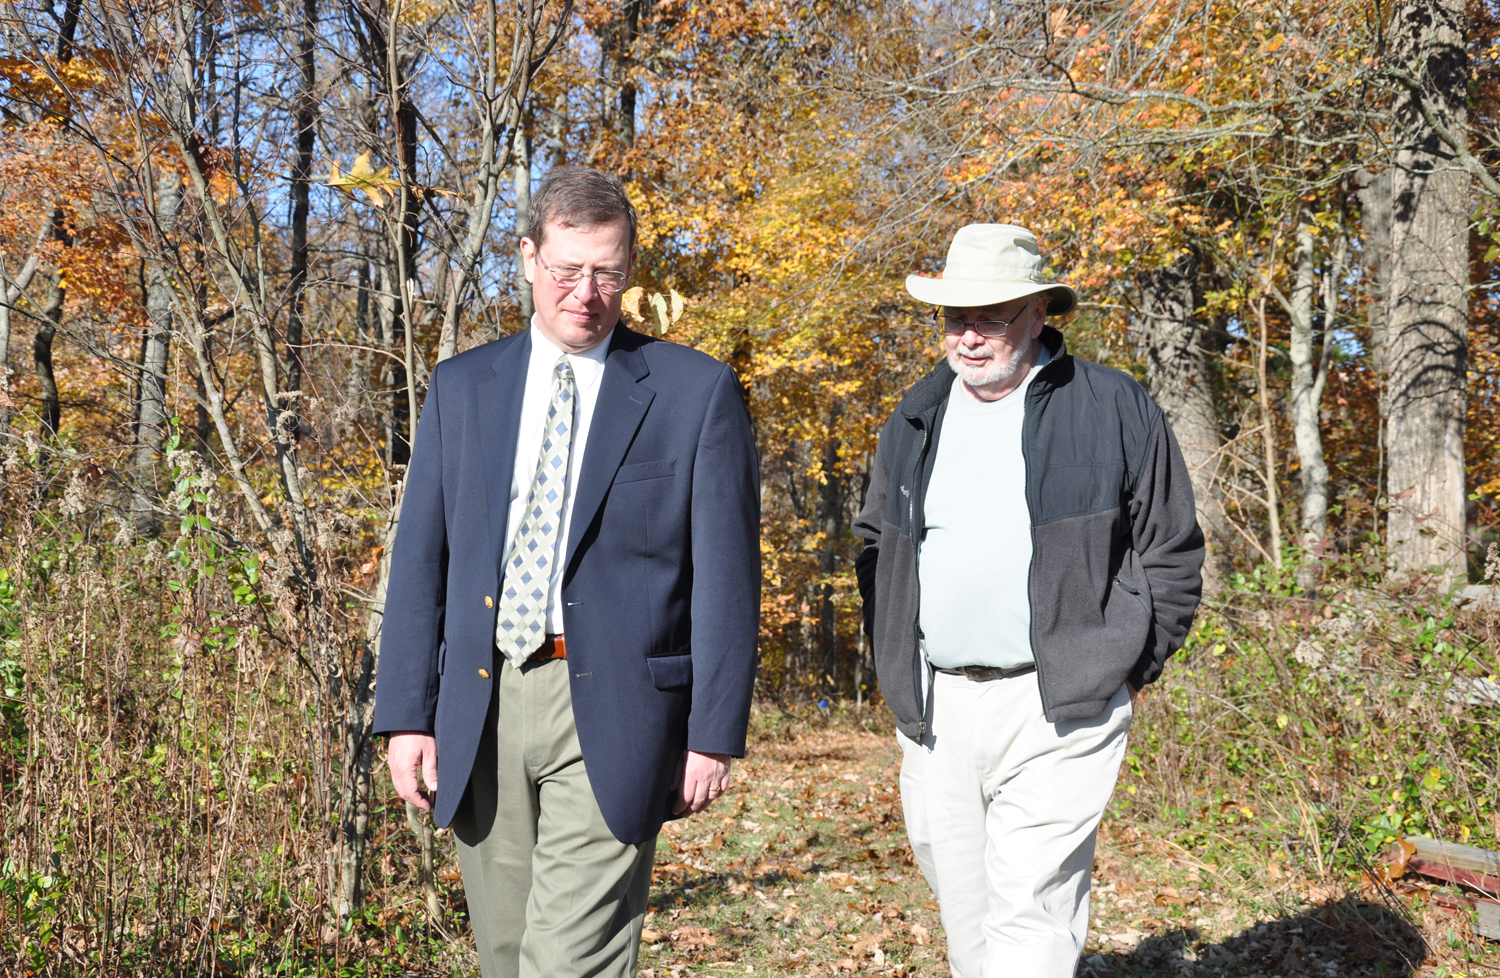 Dr. Matthew Sleeth, left, walked in Clay Hill Memorial Forest with Dr. Gordon Weddle, director of the forest. (Campbellsville University Photo by Bayarmagnai "Max" Nergui)